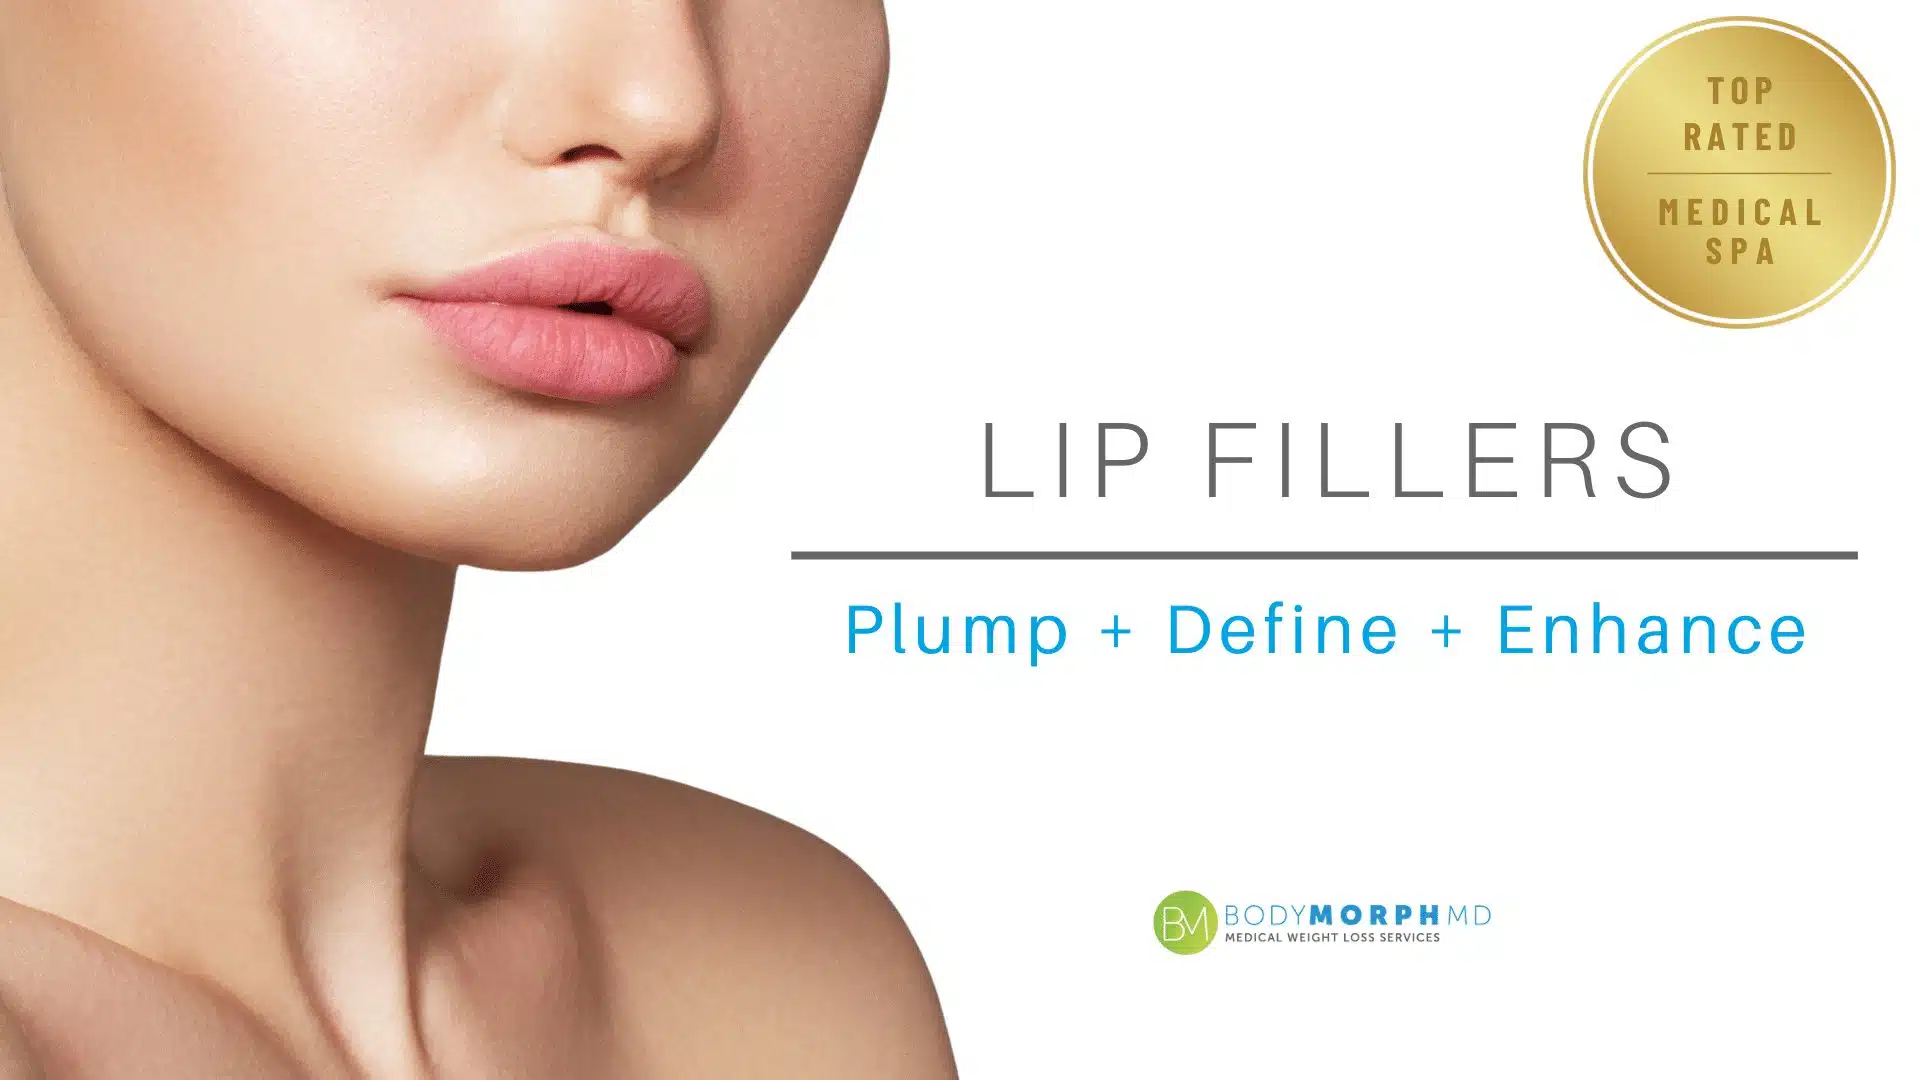 A beautiful woman with perfect lips is promoting lip filler treatment in Naples, FL.